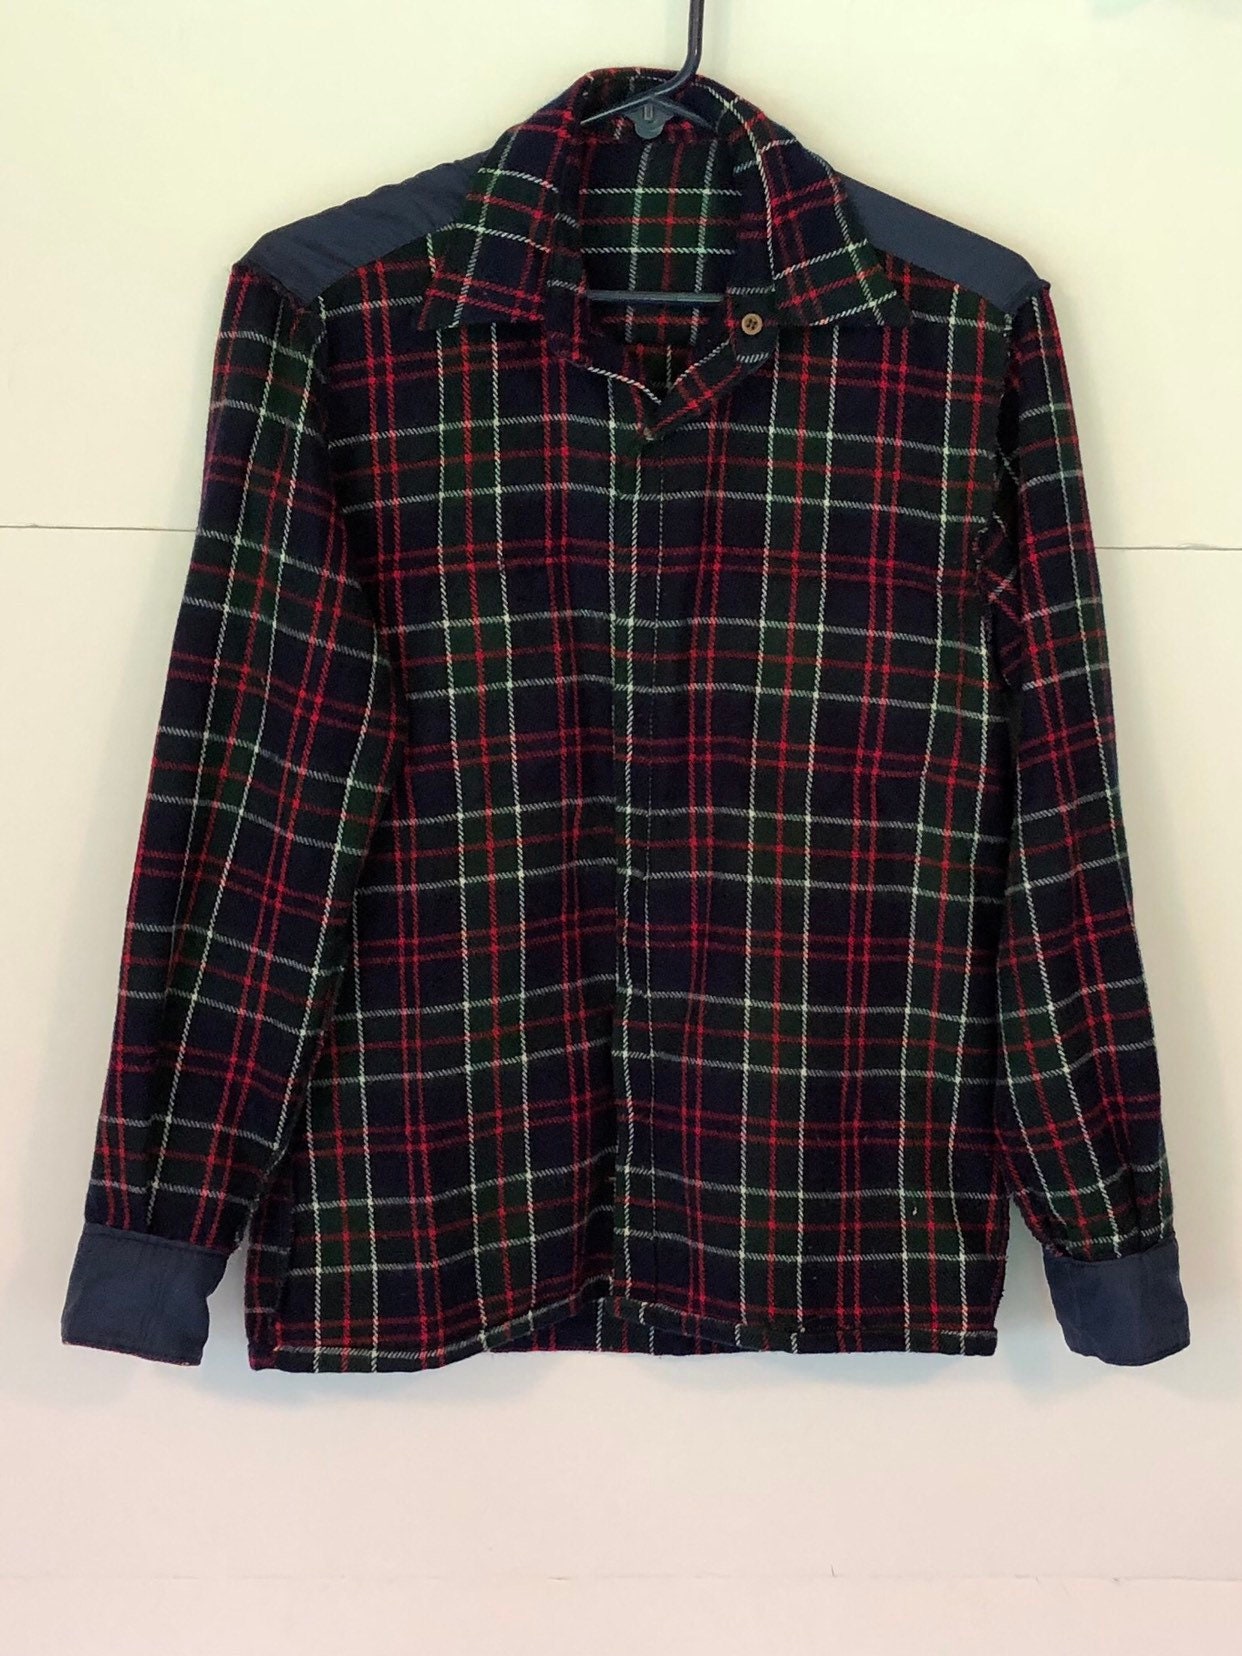 Vintage Blue and Red Tartan Plaid Button up Shirt Size Small - Etsy